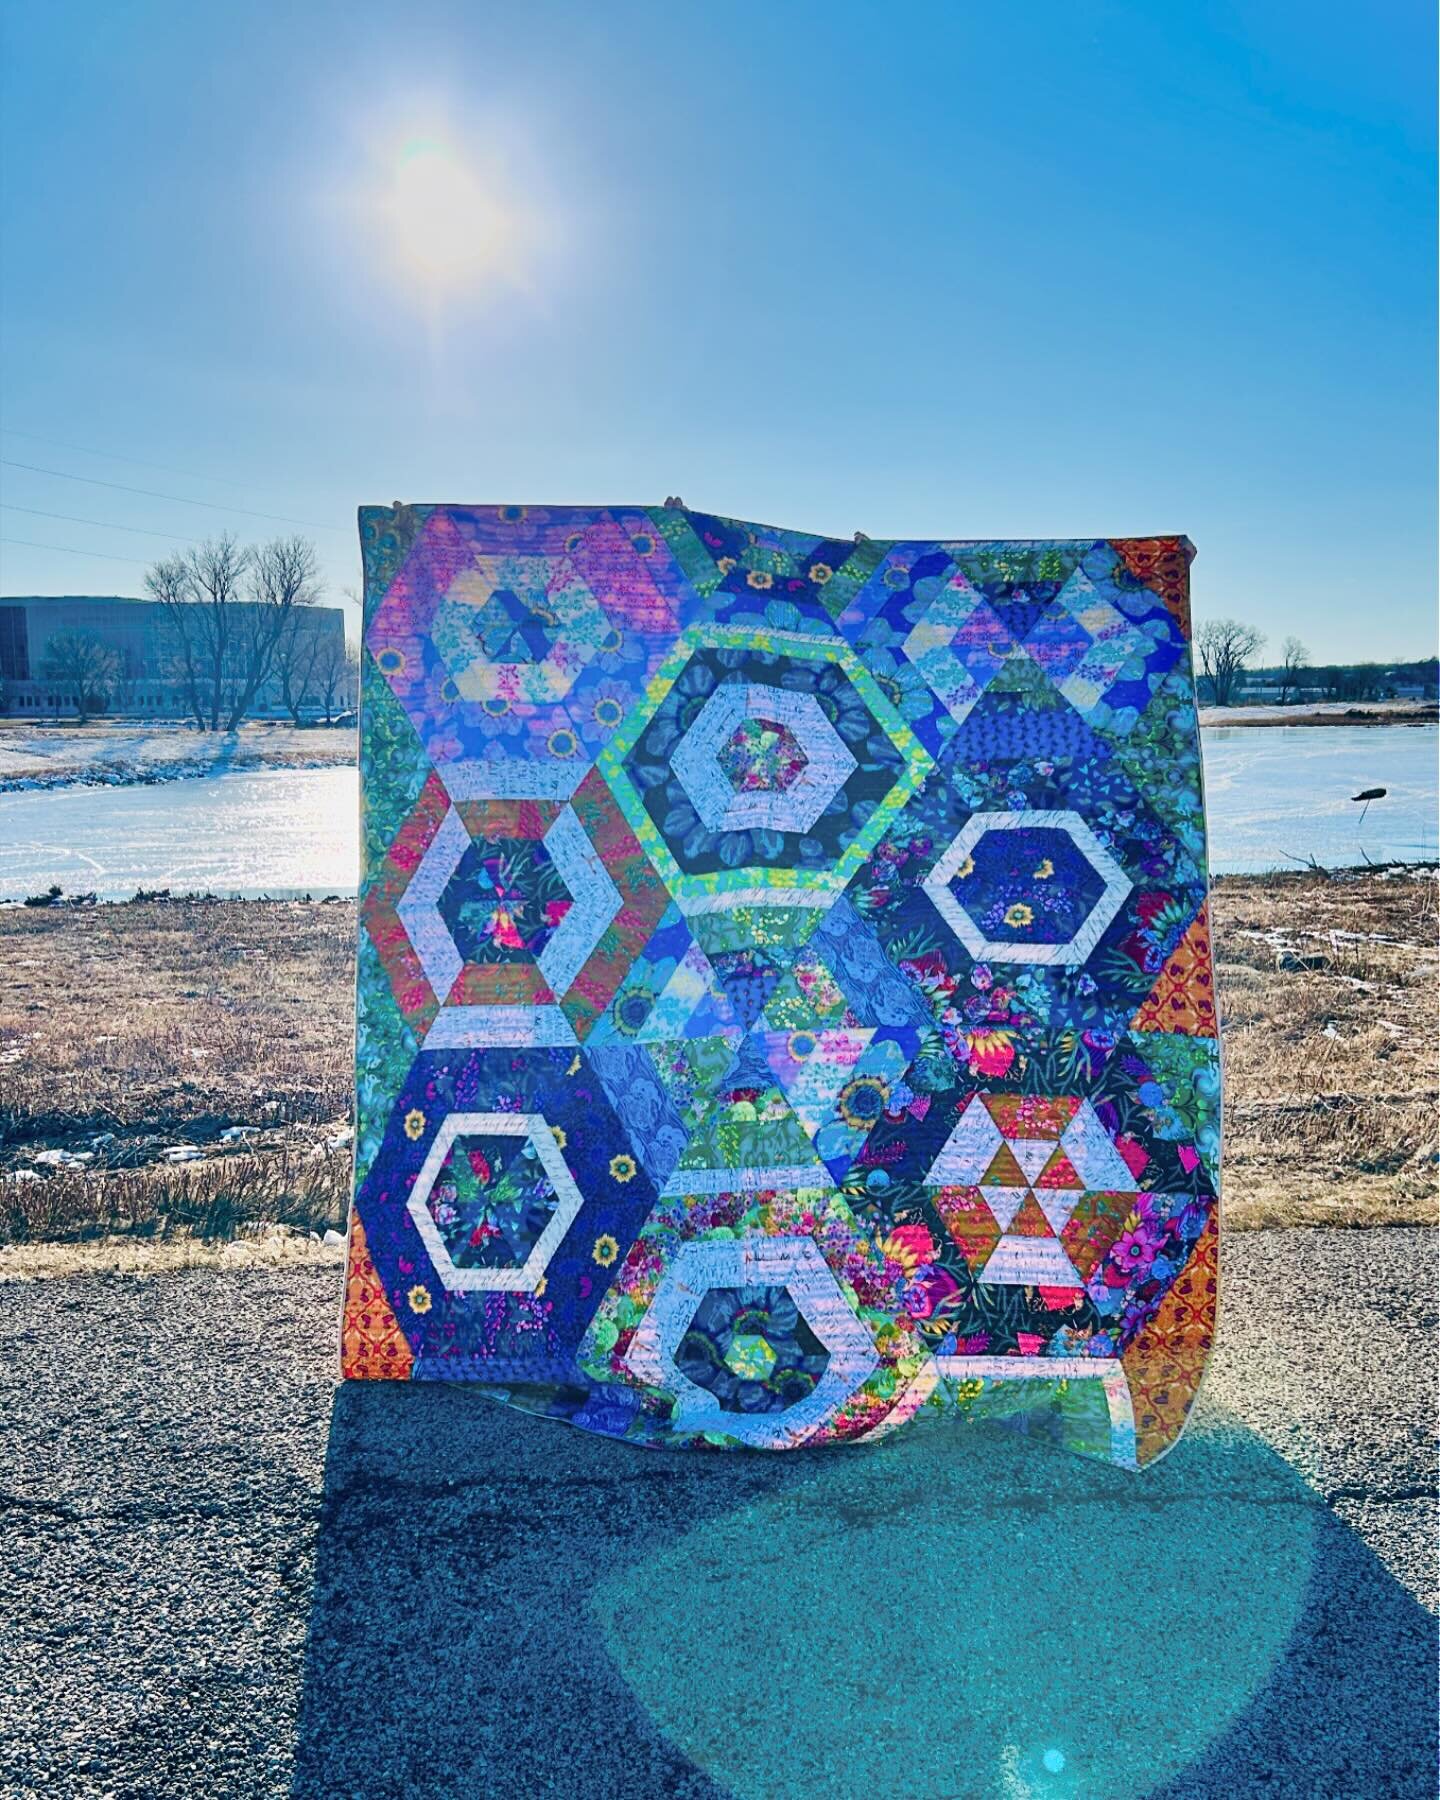 #handstiching on this gorgeous #retreat piece. 

We couldn&rsquo;t pass up taking it for a stroll on this beautiful #february day.

&ldquo;Color is my day-long obsession, joy and torment.&rdquo; &ndash; Claude Monet

Join me on this retreat, in April